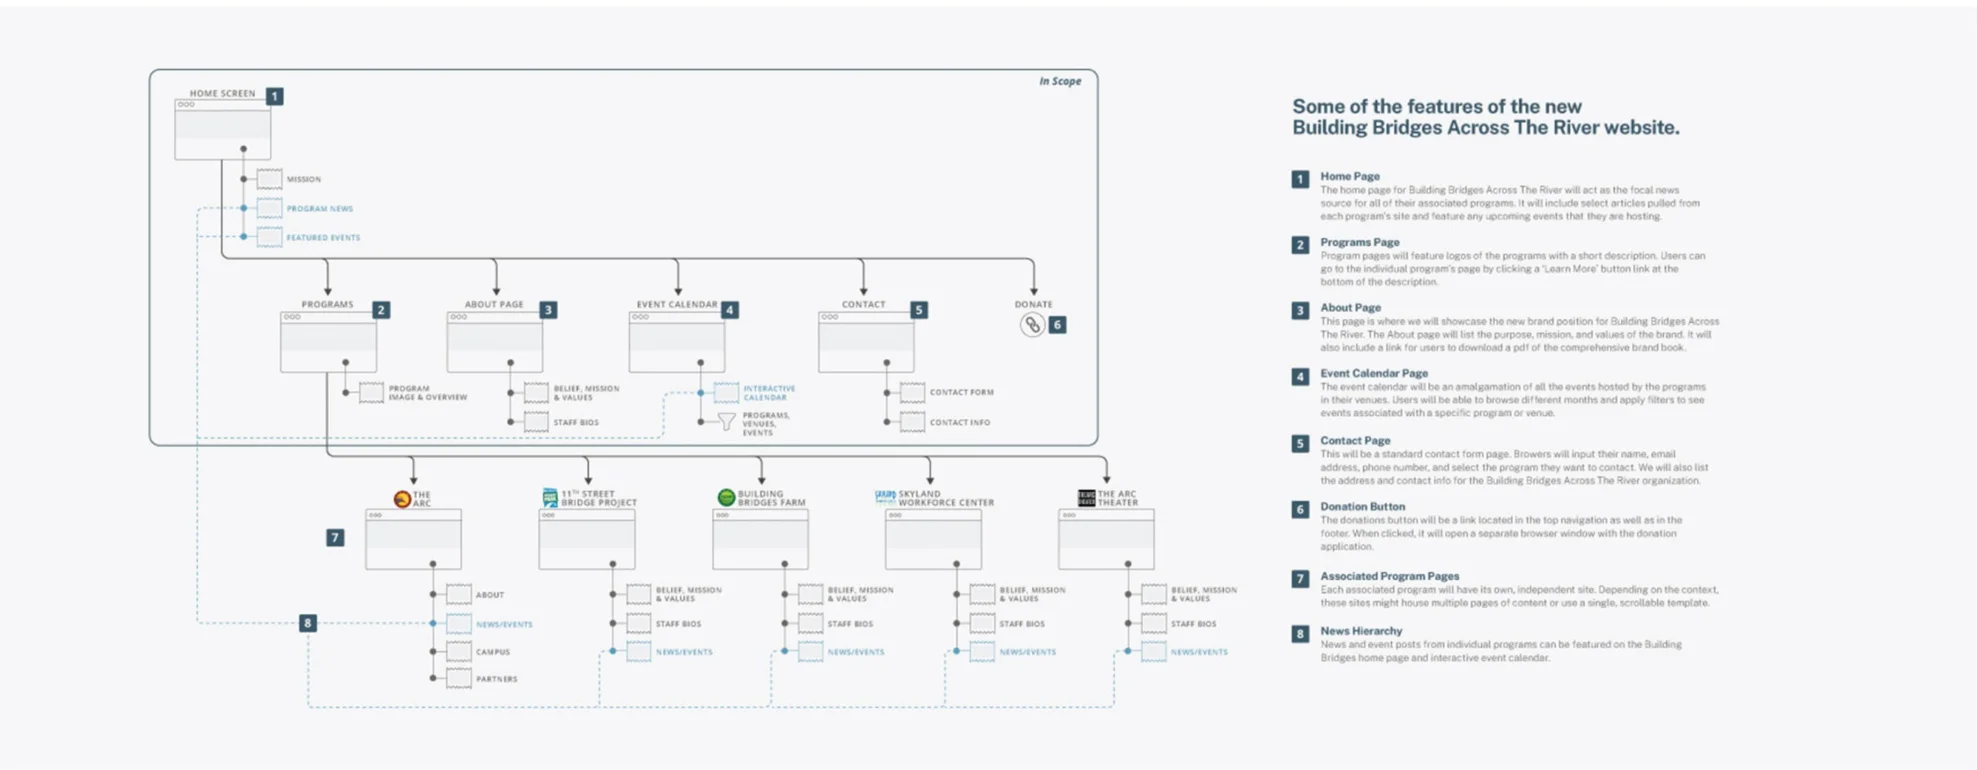 Image of a user journey the follows the career path of an employee.